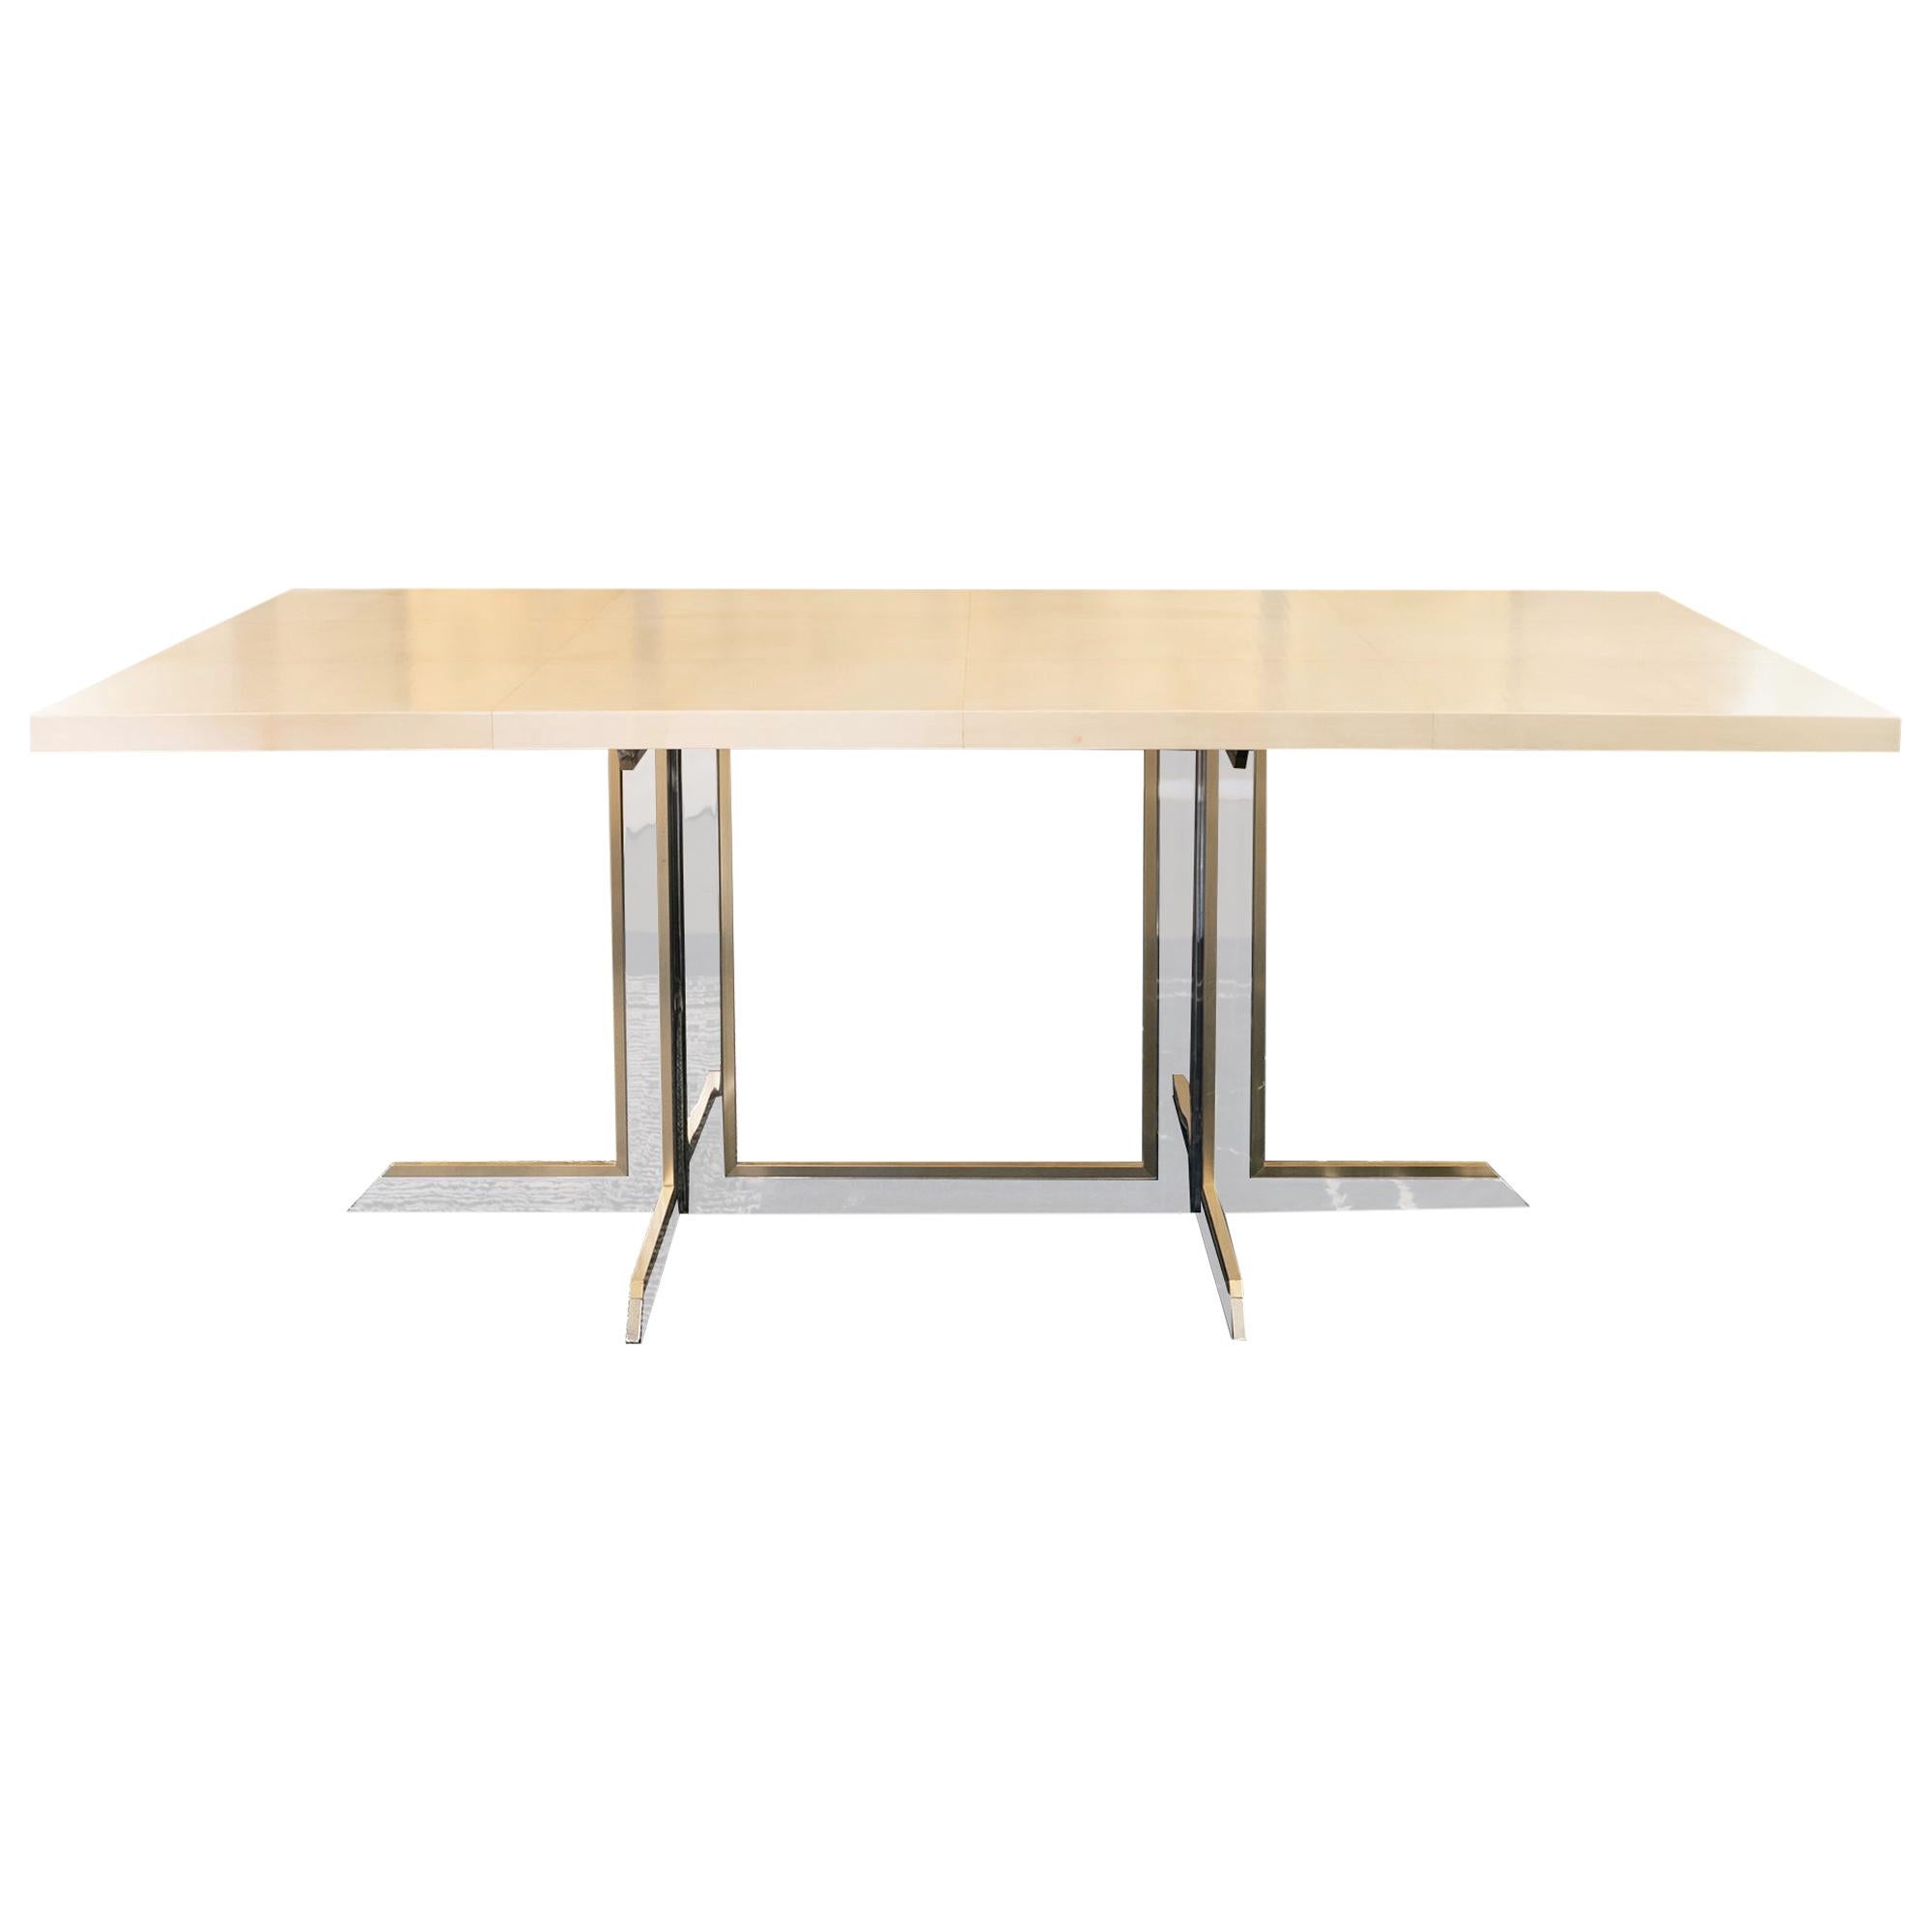 1970s Italian Chrome and Brass Dining Table with Natural Parchment Top